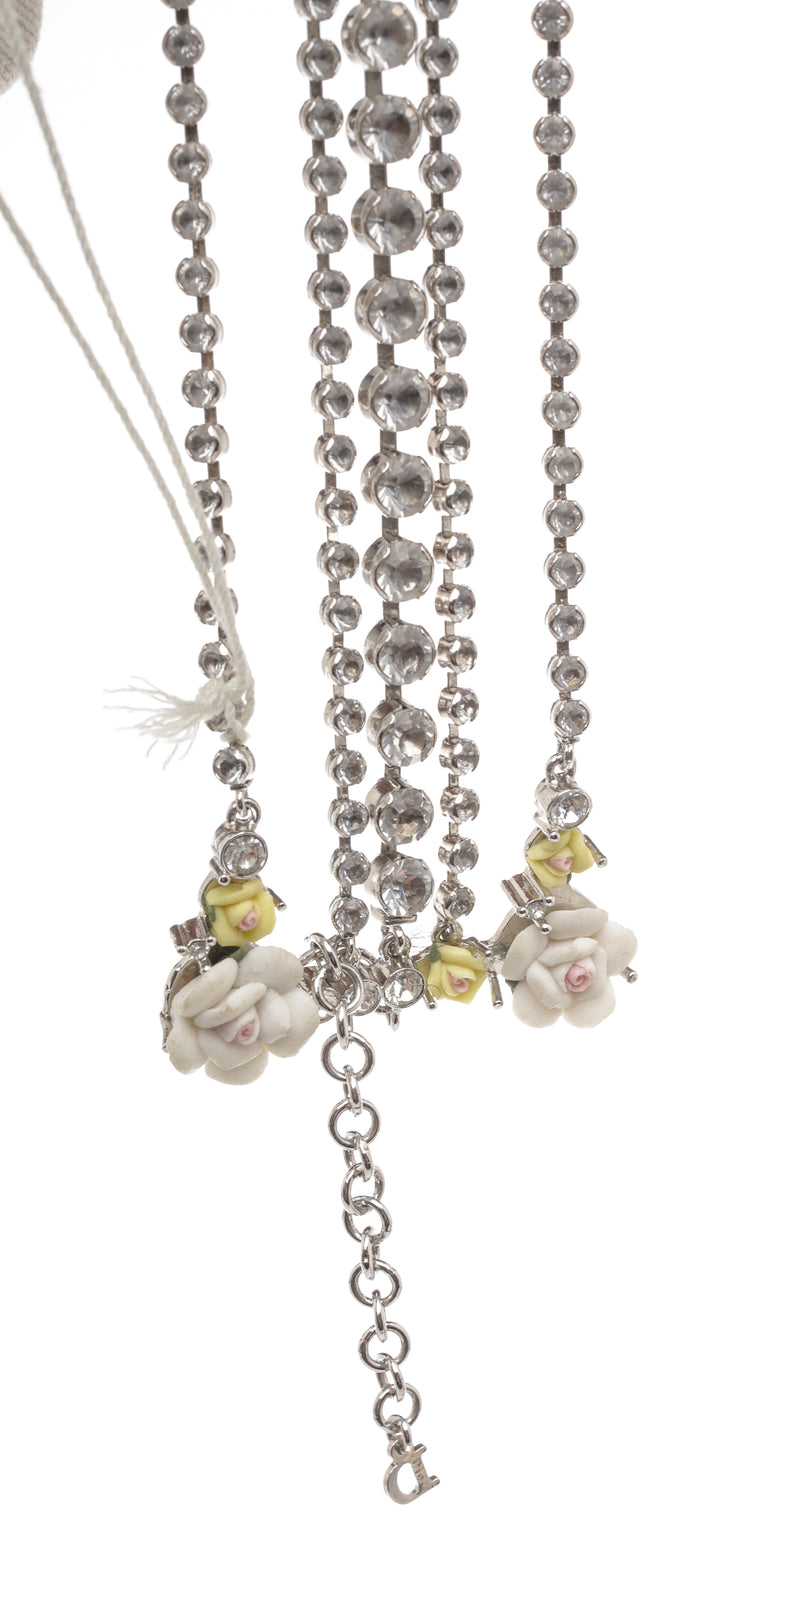 Christian Dior Silver and Crystal Flower Necklace